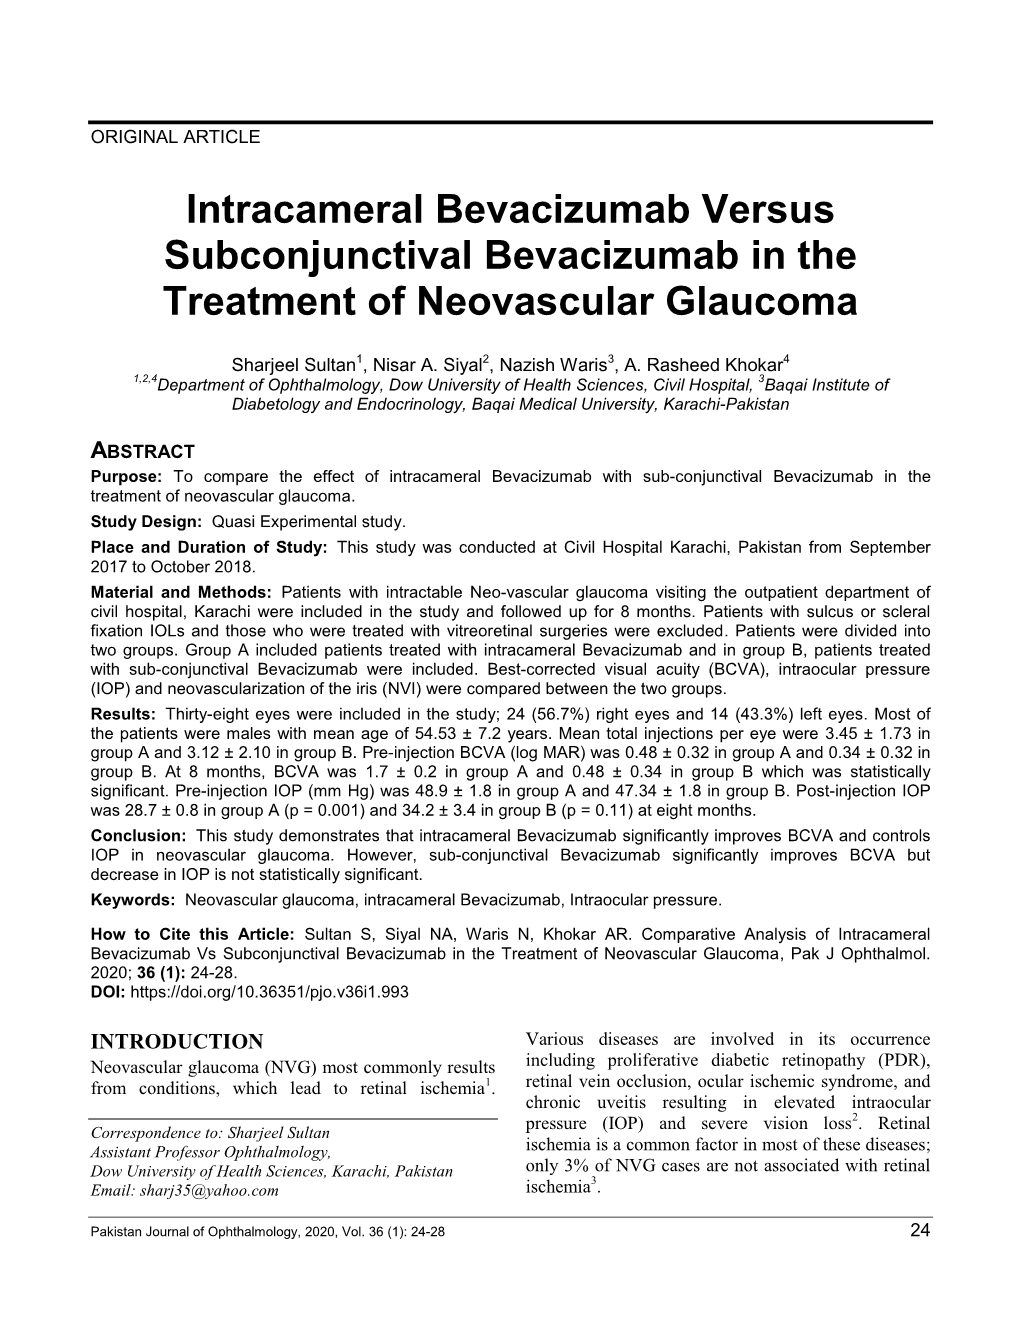 Intracameral Bevacizumab Versus Subconjunctival Bevacizumab in the Treatment of Neovascular Glaucoma